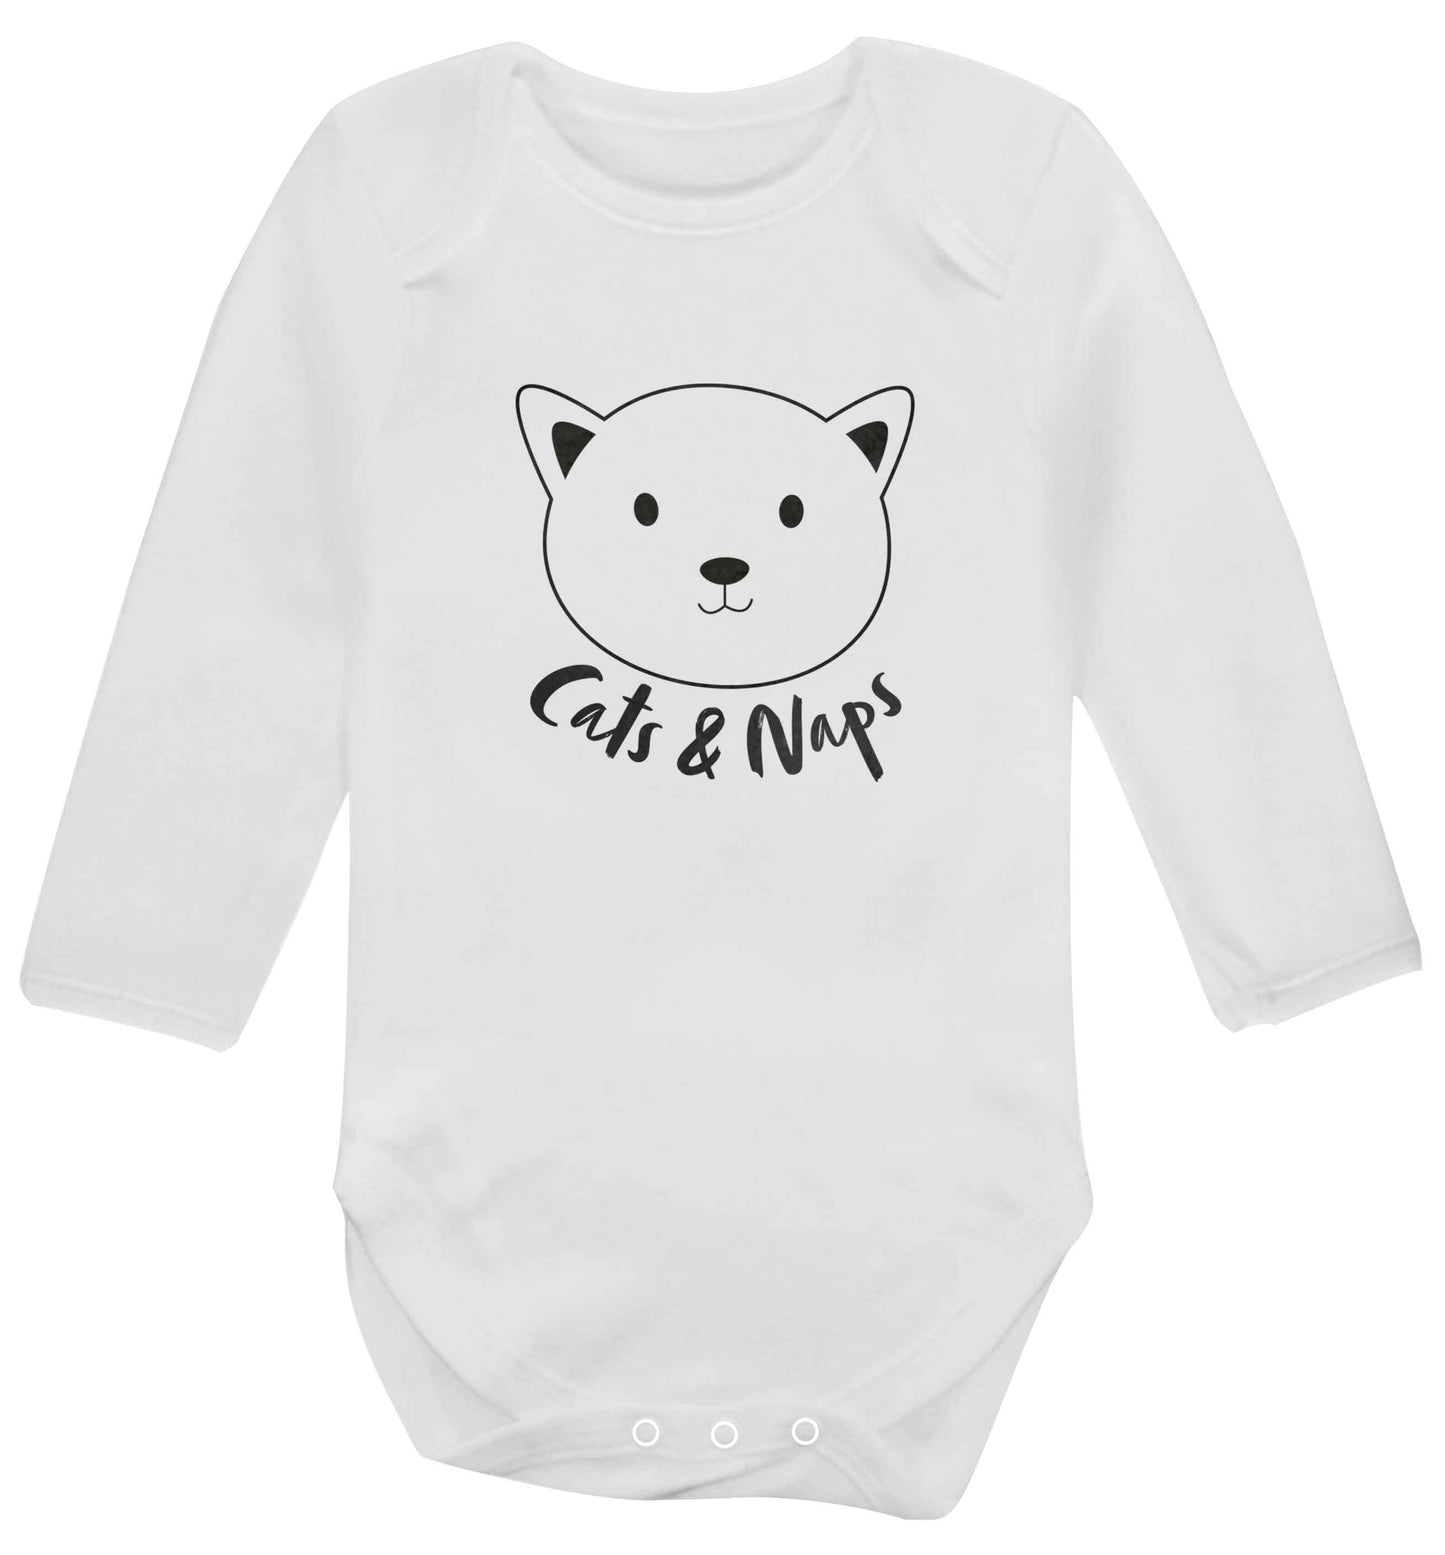 Cats and naps Kit baby vest long sleeved white 6-12 months